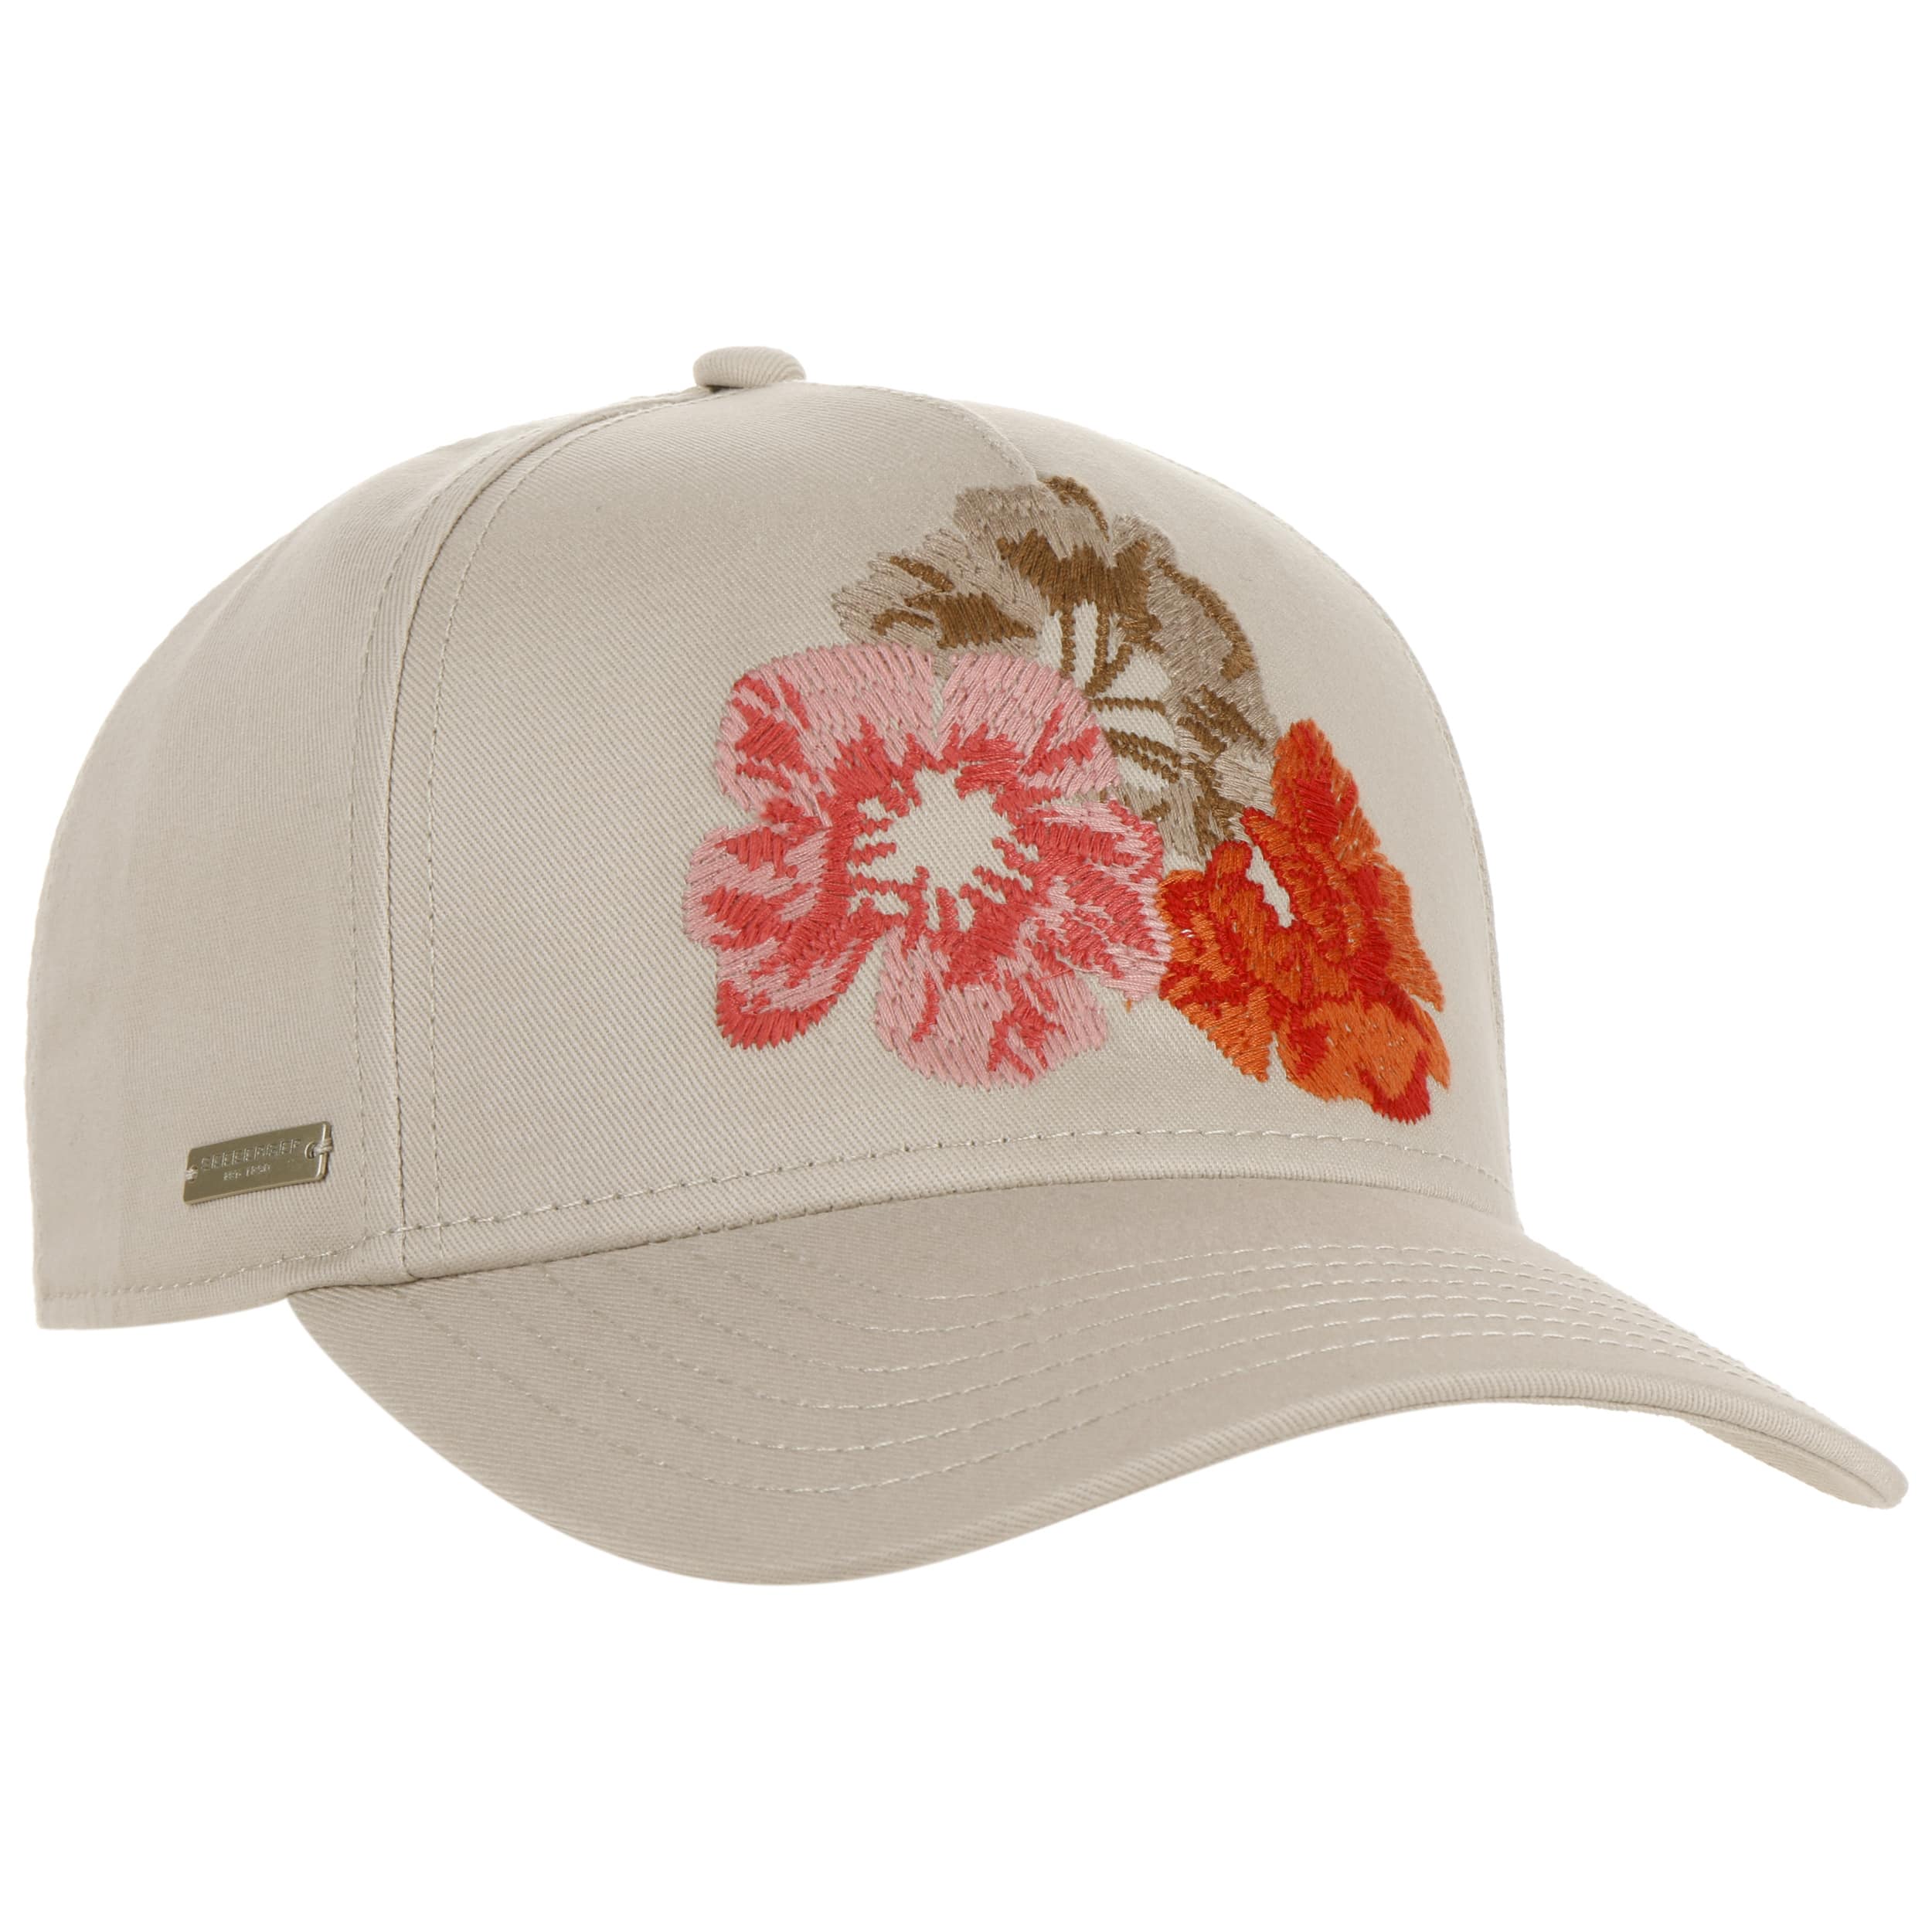 Stitched Flowers Cap by Seeberger € - 29,95